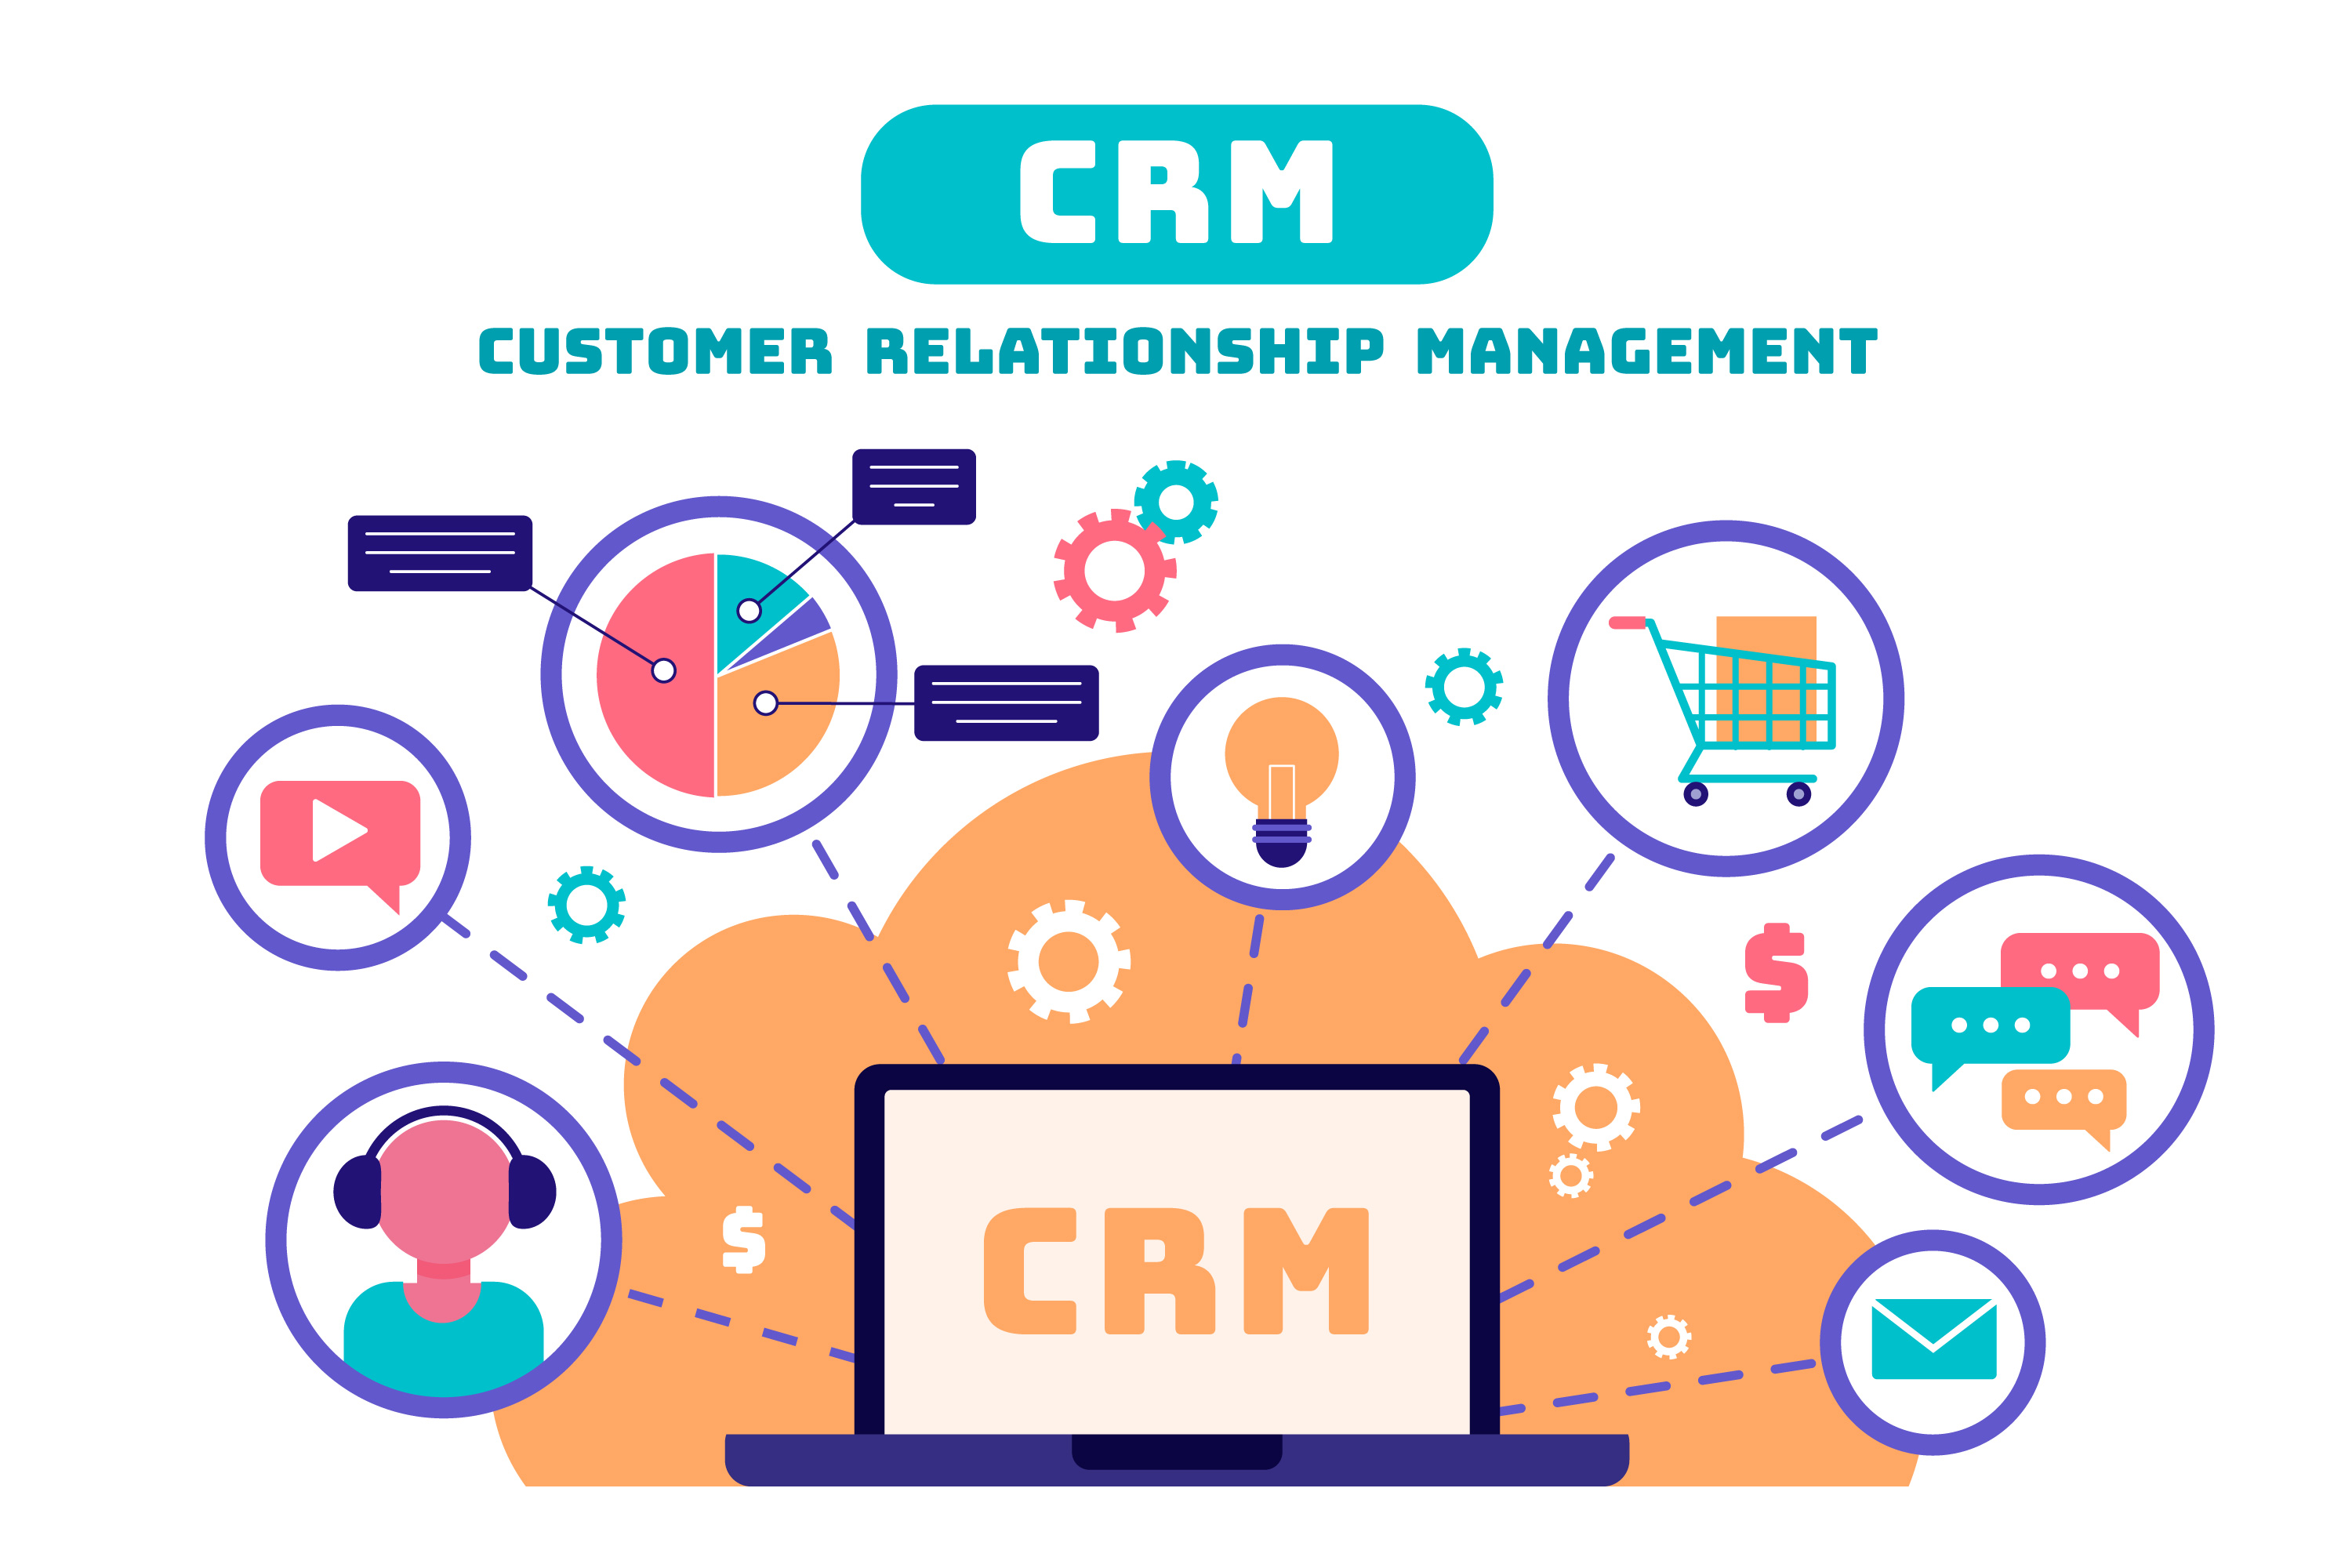 How can CRM improve internal communications?
